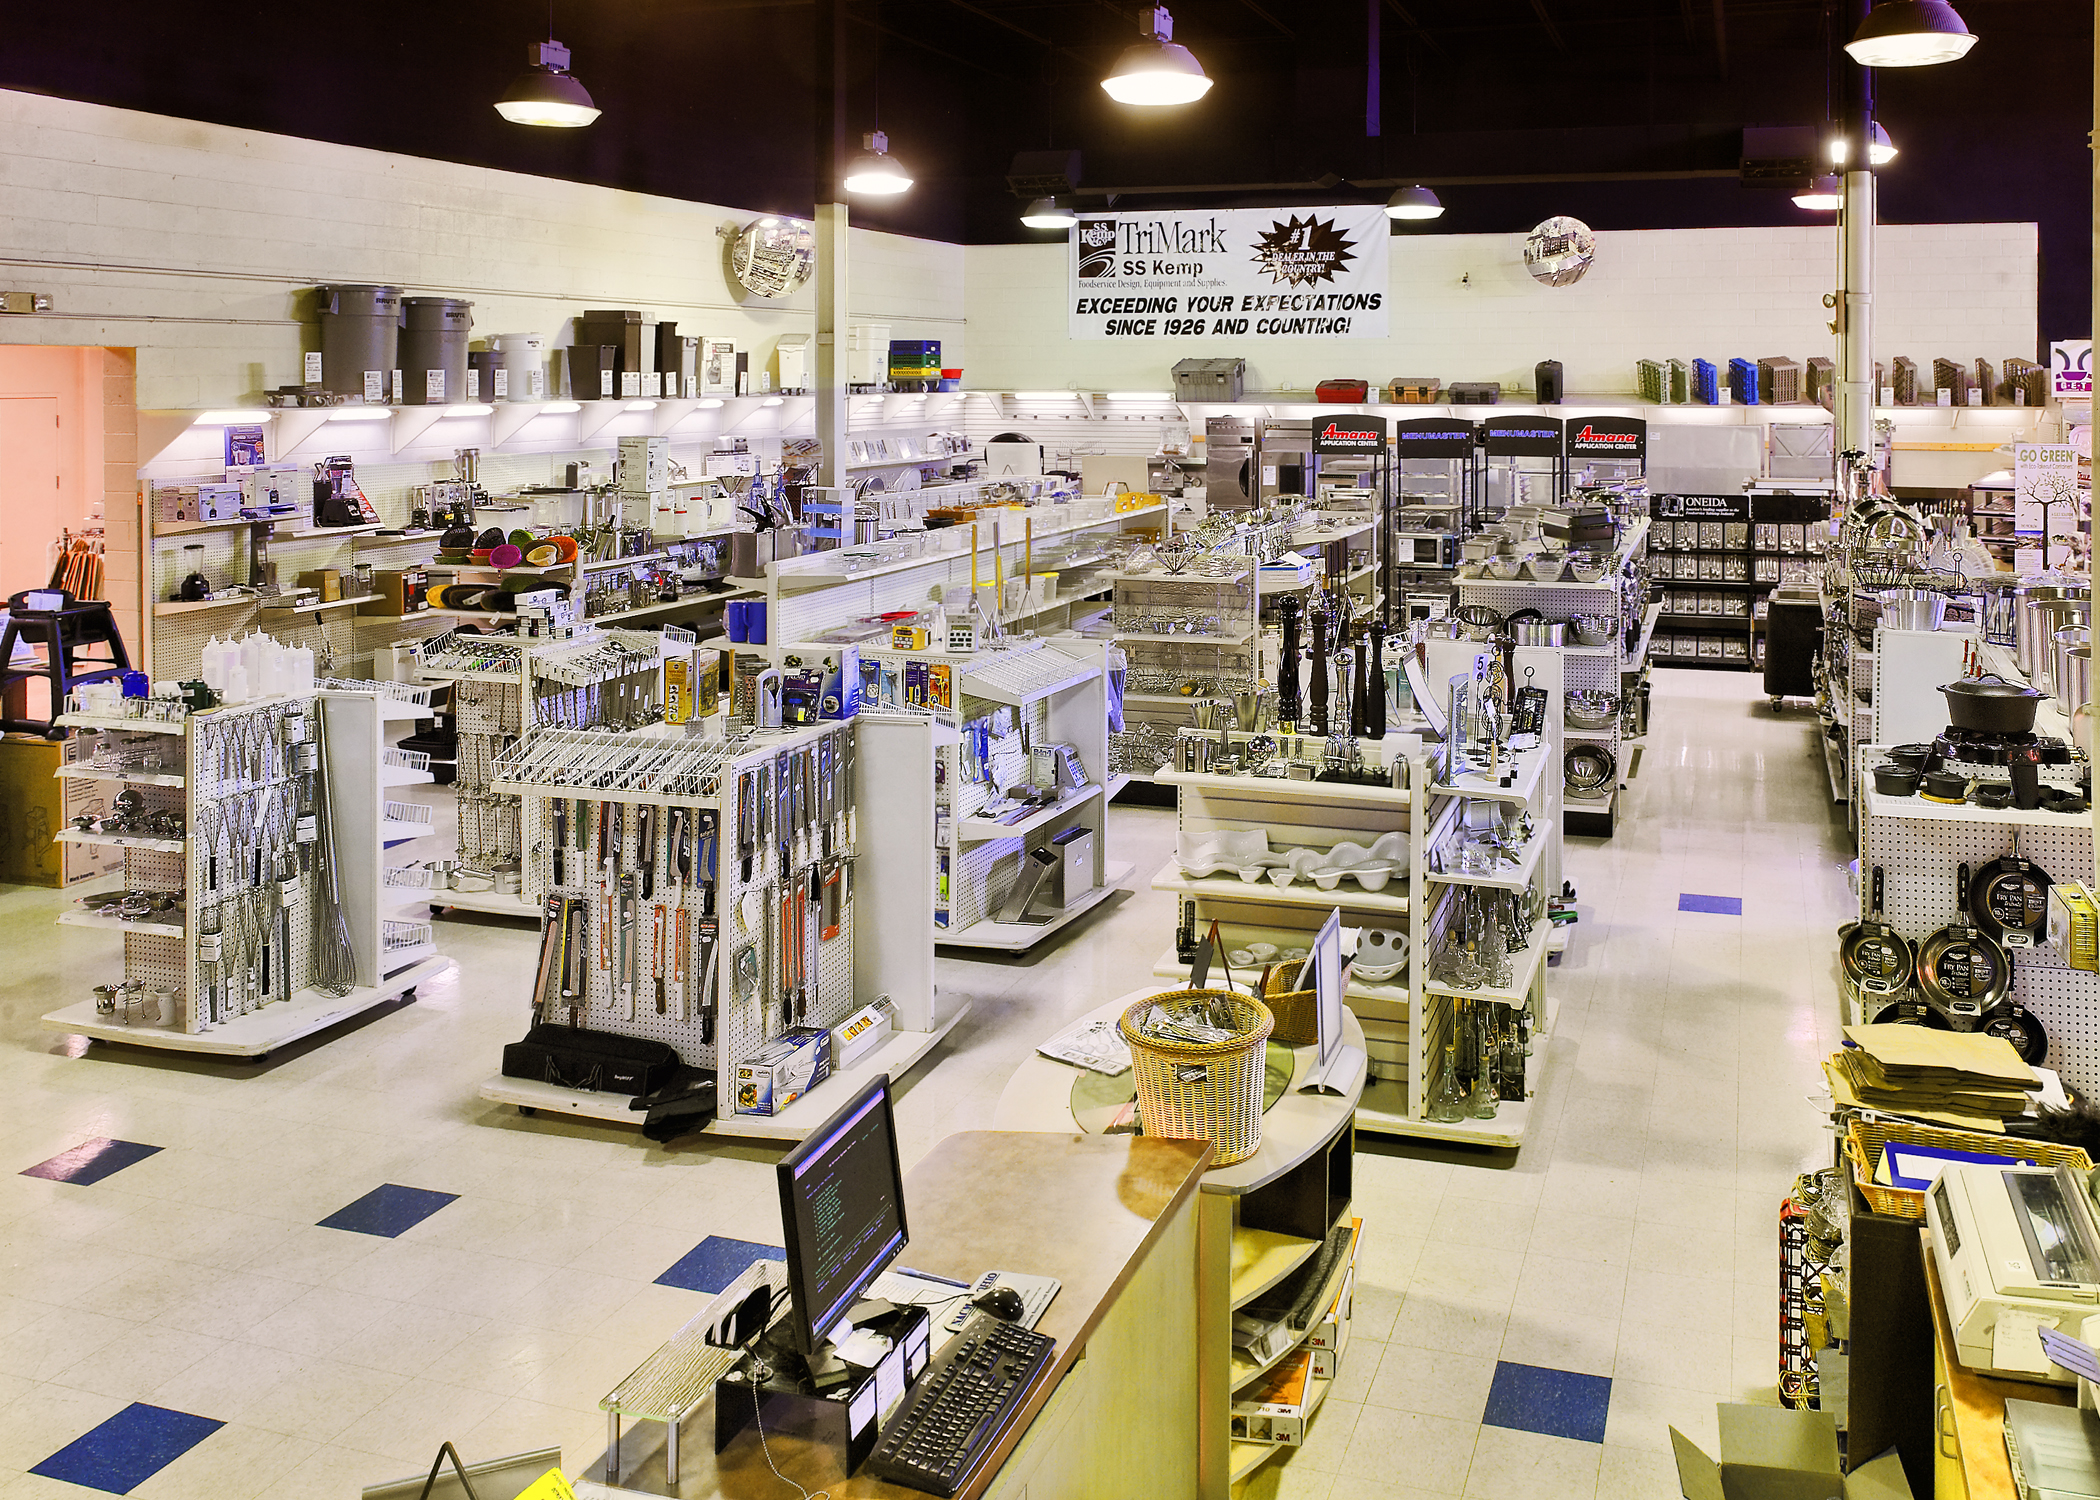 TriMark SS Kemp Showroom, Test Kitchen and Training Facility